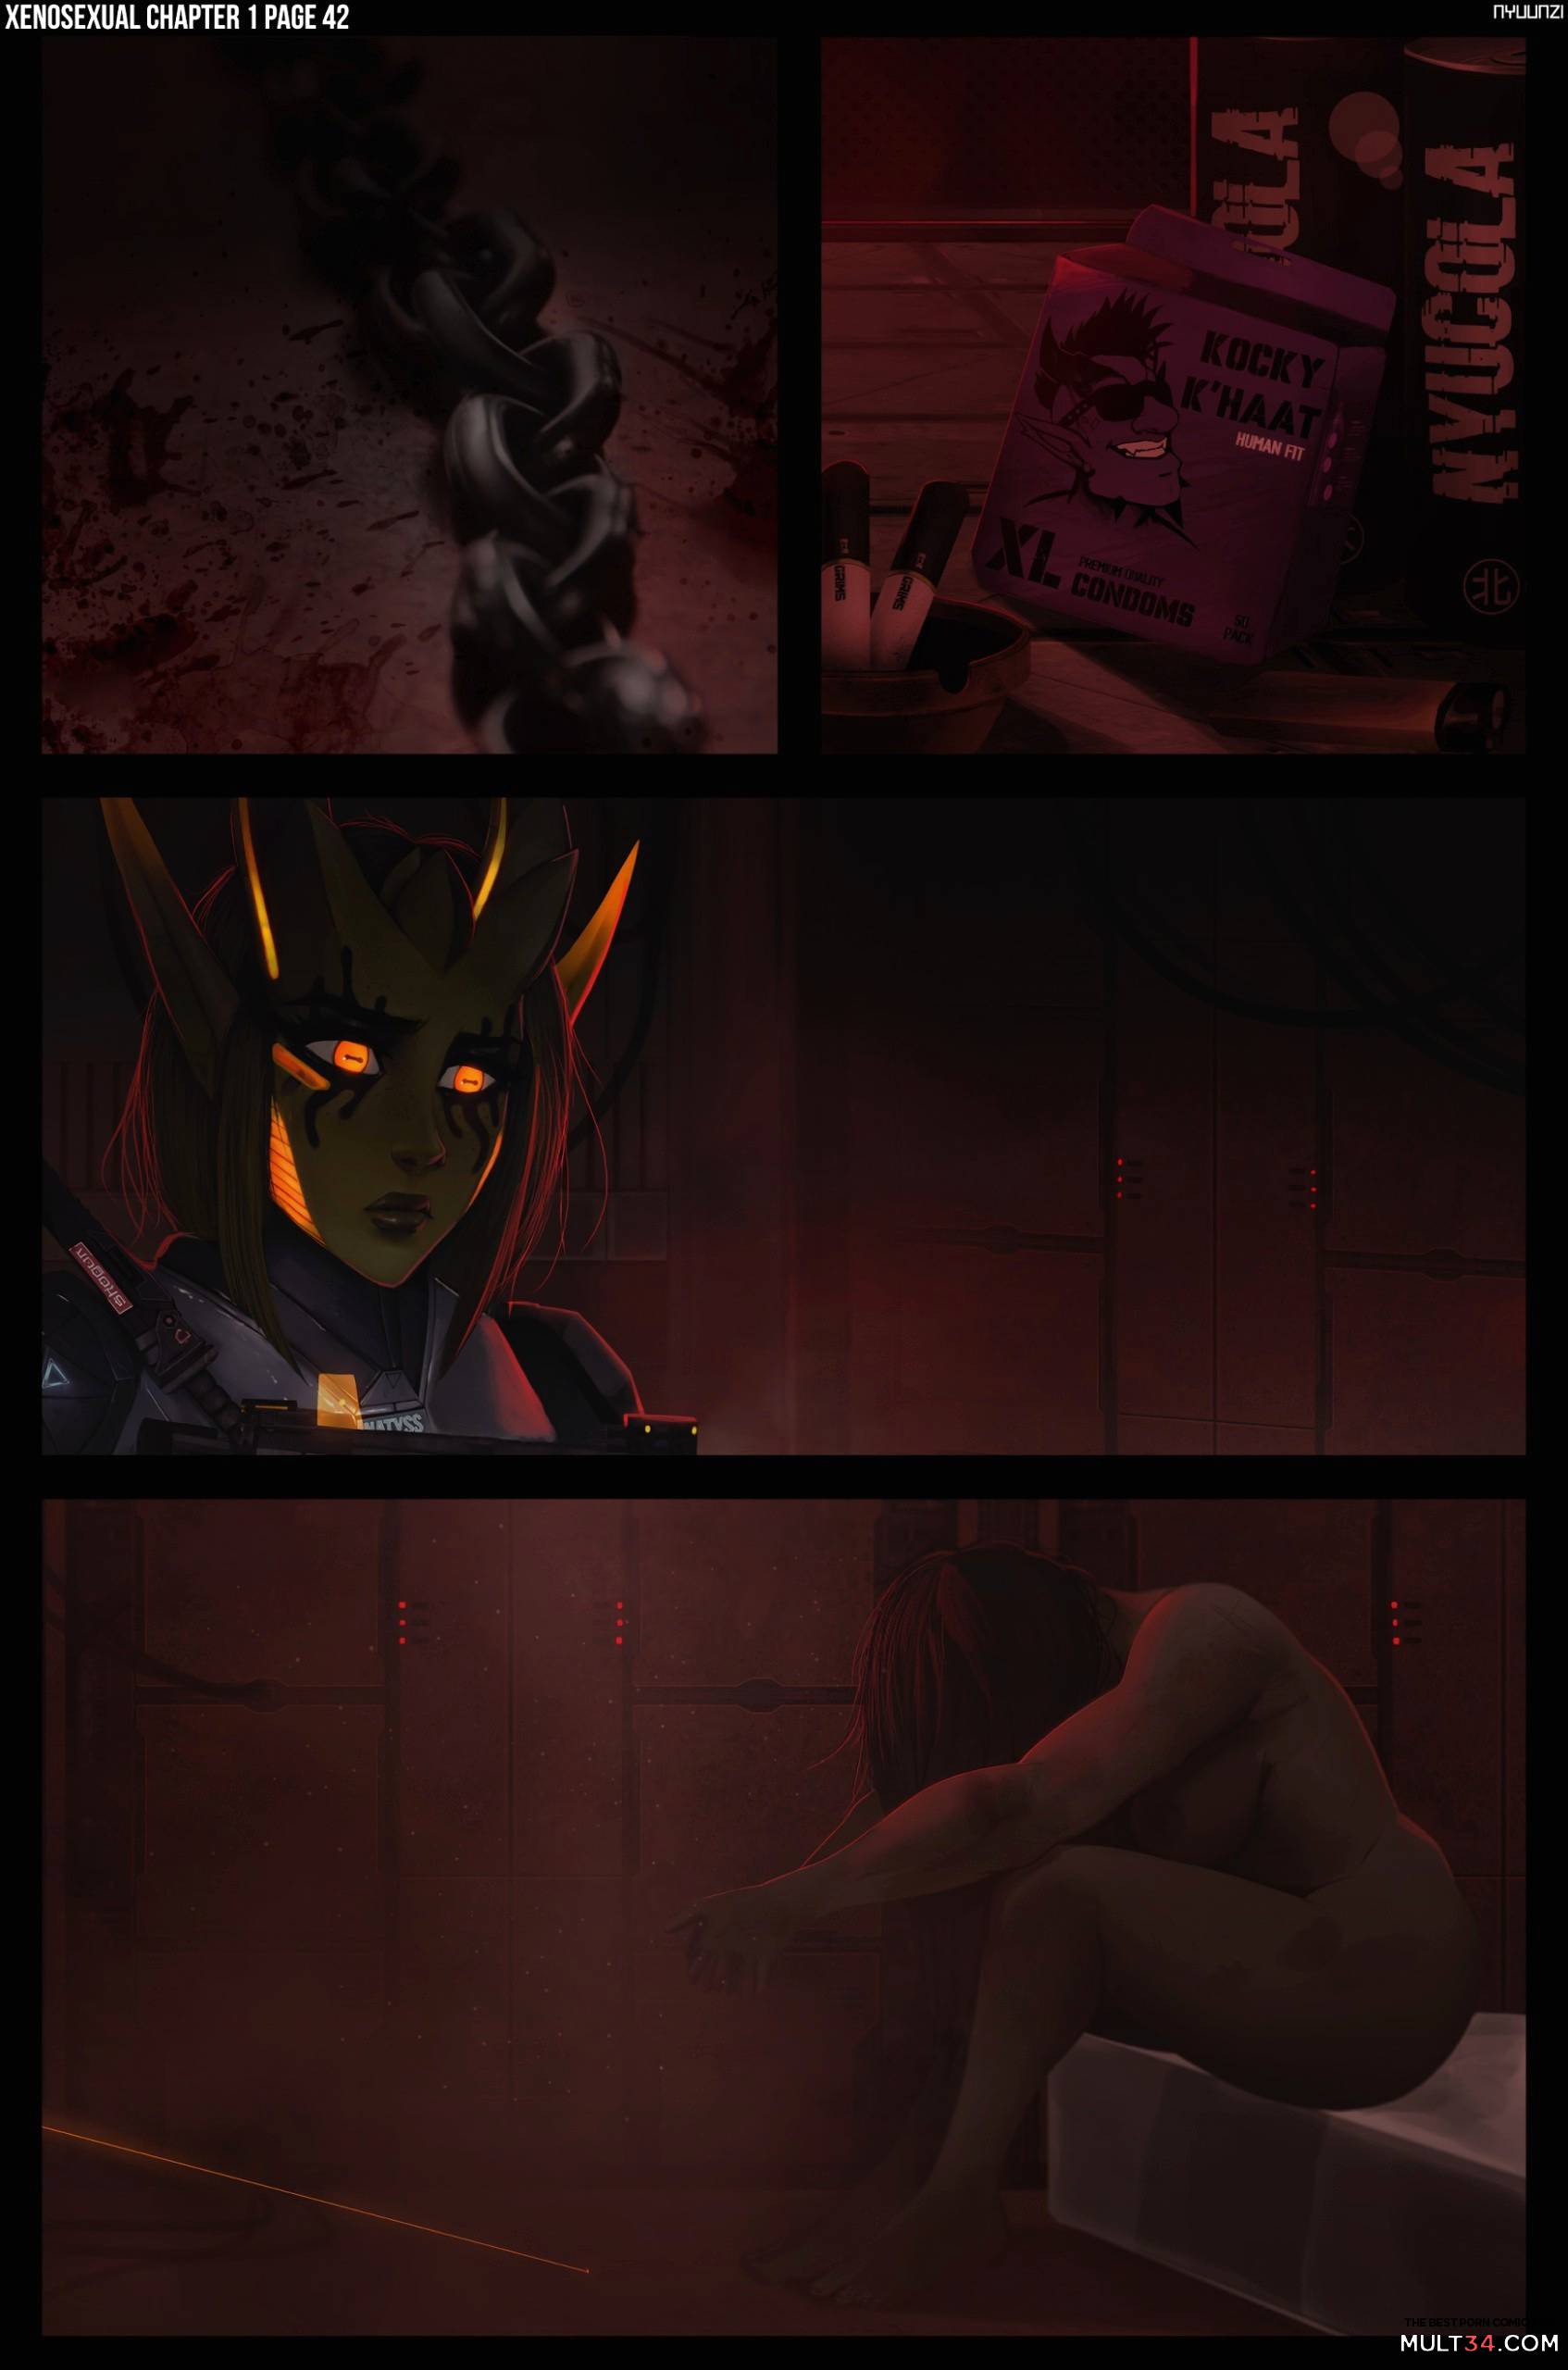 Xenosexual (Reboot) page 44